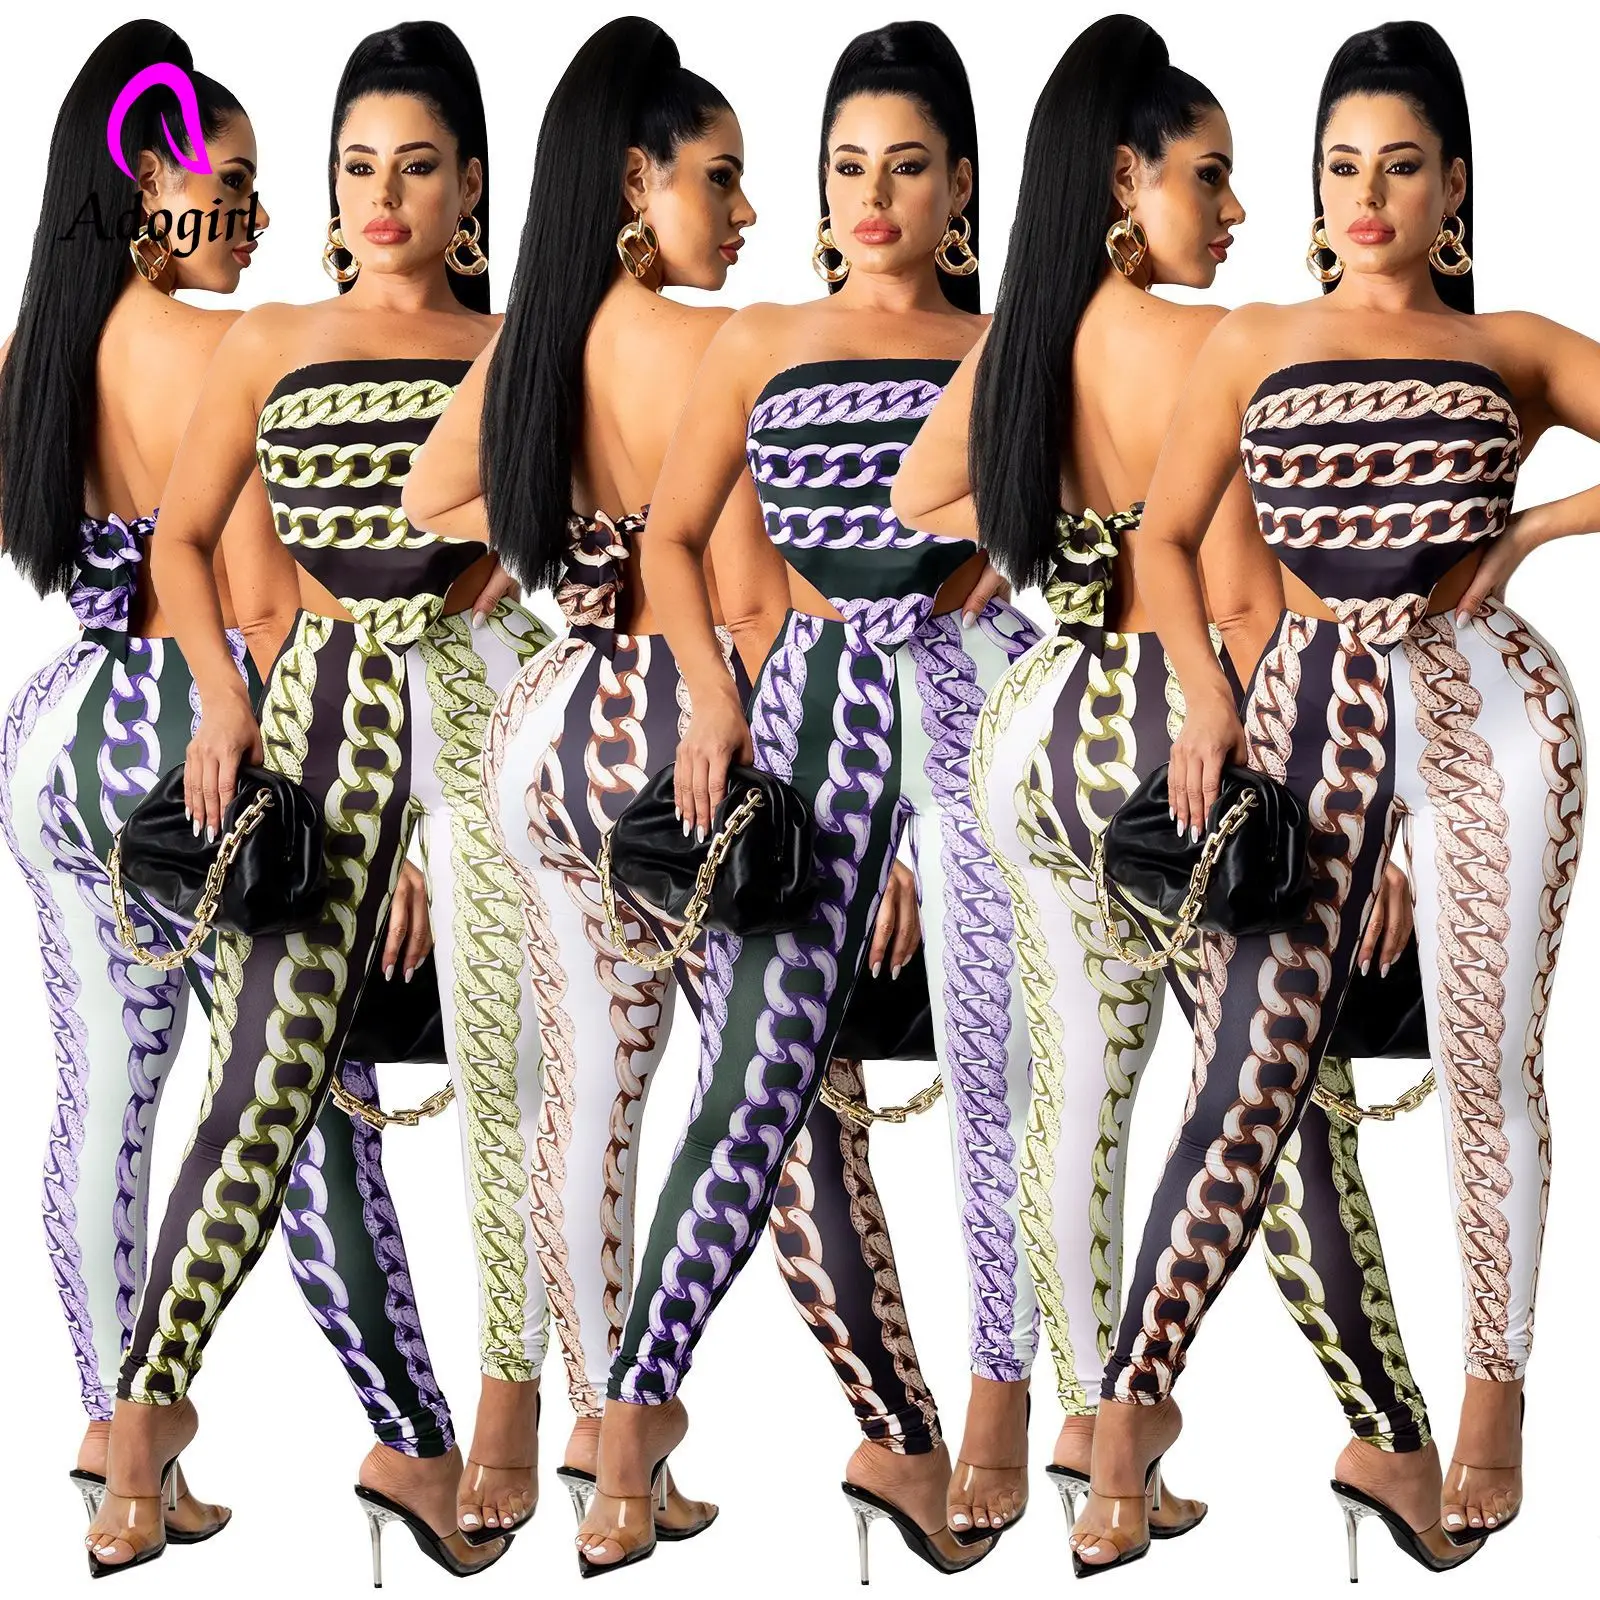  Chain Printed Women 2 Piece Set  Off Shoulder Crop Top + High Waist Leggings Matching Set 2021 Summer Sexy Club Party Outfits